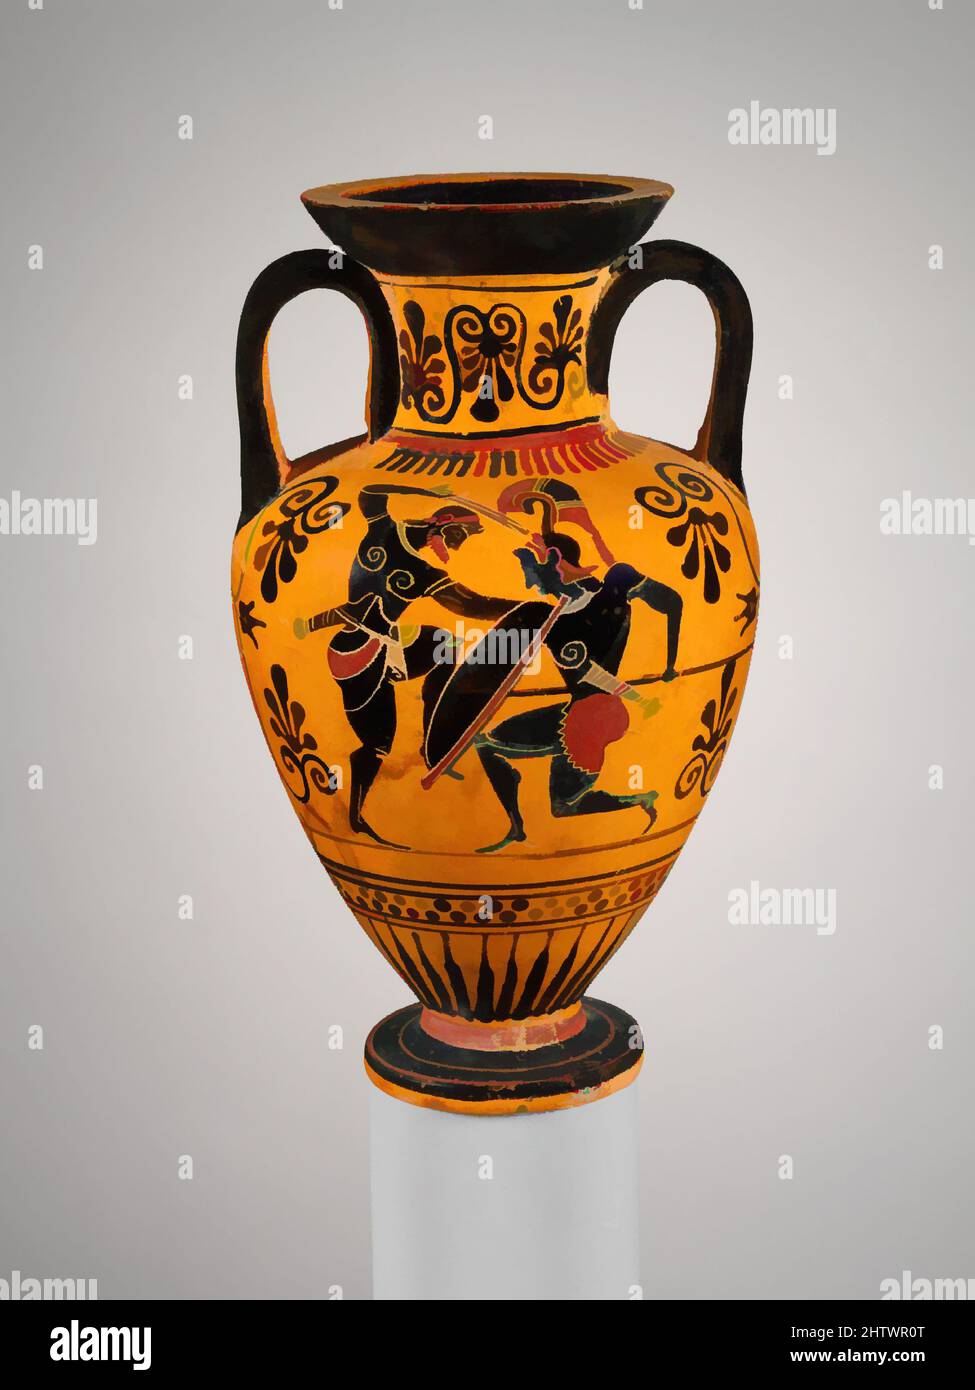 Art inspired by Terracotta neck-amphora (jar), Archaic, ca. 500 B.C., Greek, Attic, Terracotta; black-figure, H. 5 3/4 in. (14.6 cm.), Vases, Obverse, Theseus and the Minotaur with Ariadne (?), Reverse, Herakles battles an Amazon. This small neck-amphora shows Theseus slaying the, Classic works modernized by Artotop with a splash of modernity. Shapes, color and value, eye-catching visual impact on art. Emotions through freedom of artworks in a contemporary way. A timeless message pursuing a wildly creative new direction. Artists turning to the digital medium and creating the Artotop NFT Stock Photo